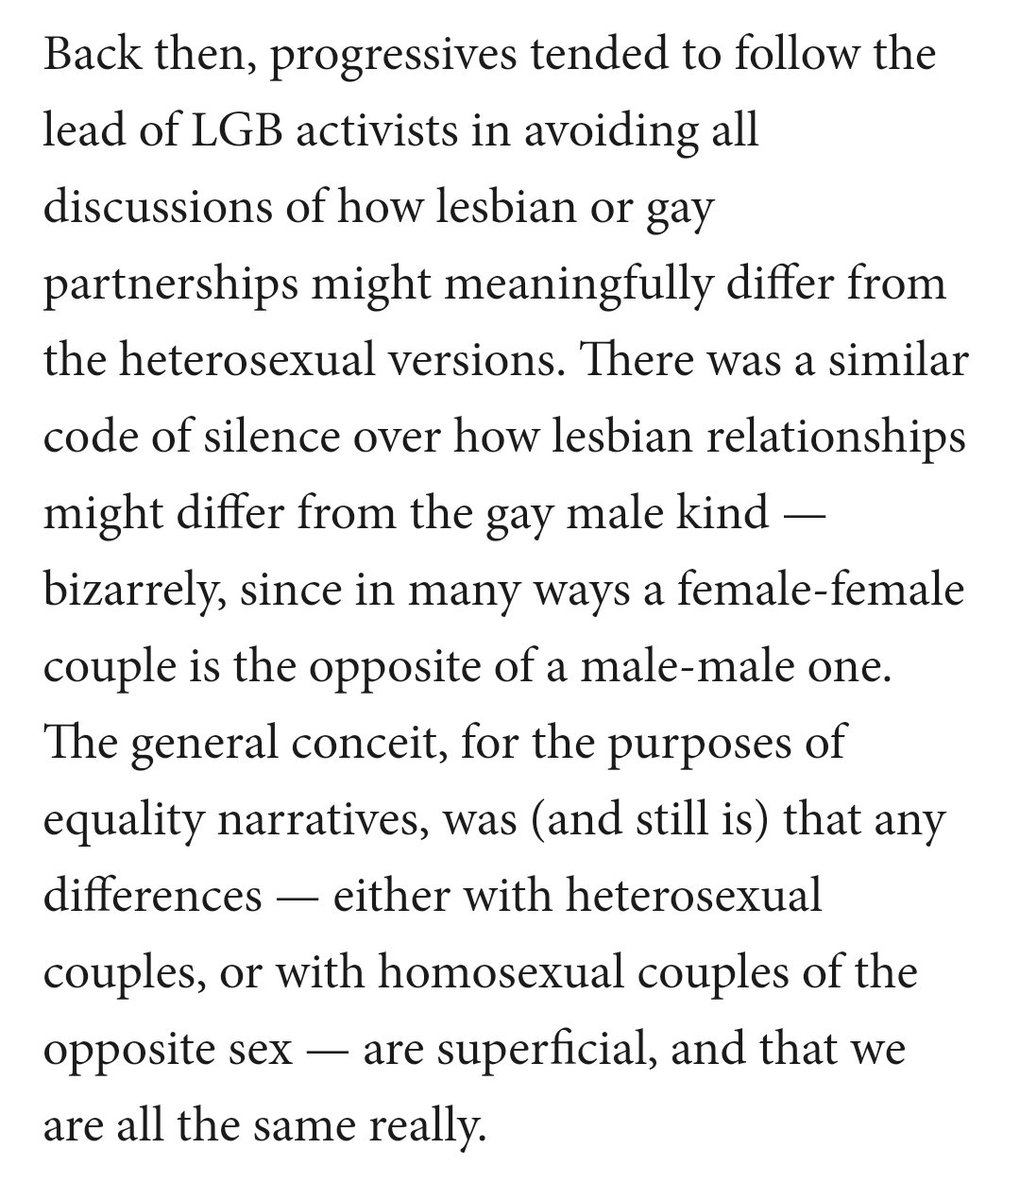 Important intellectual Kathleen Stock spending her time watching dating shows on Netflix,  worrying about a progressive conspiracy of silence over ways that lesbian relationships differ from gay male relationships. A difference about which she declines to elaborate. https://t.co/4ag1Ytl0aF